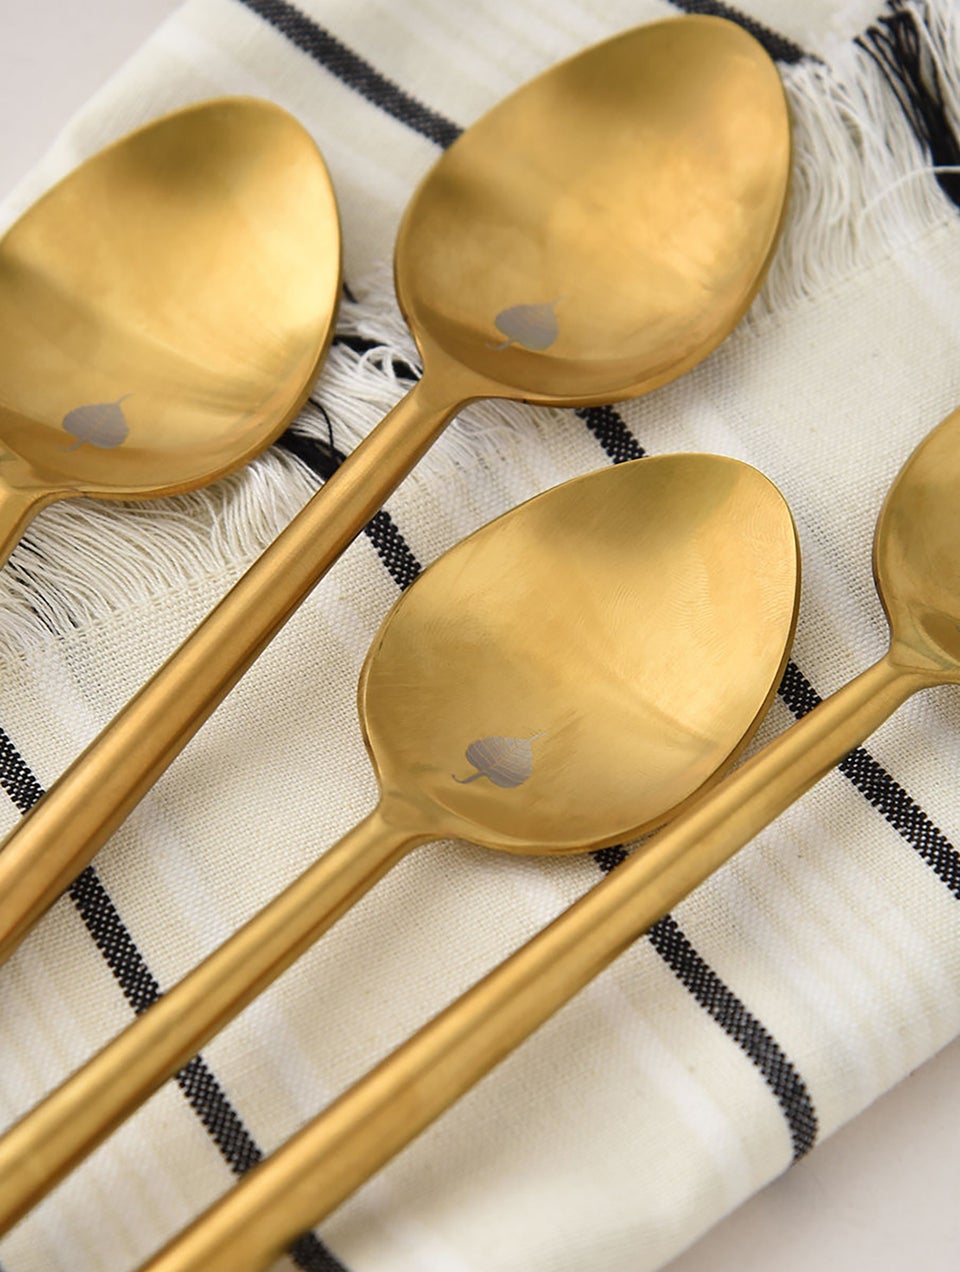 Gold Tone Dinner Spoons